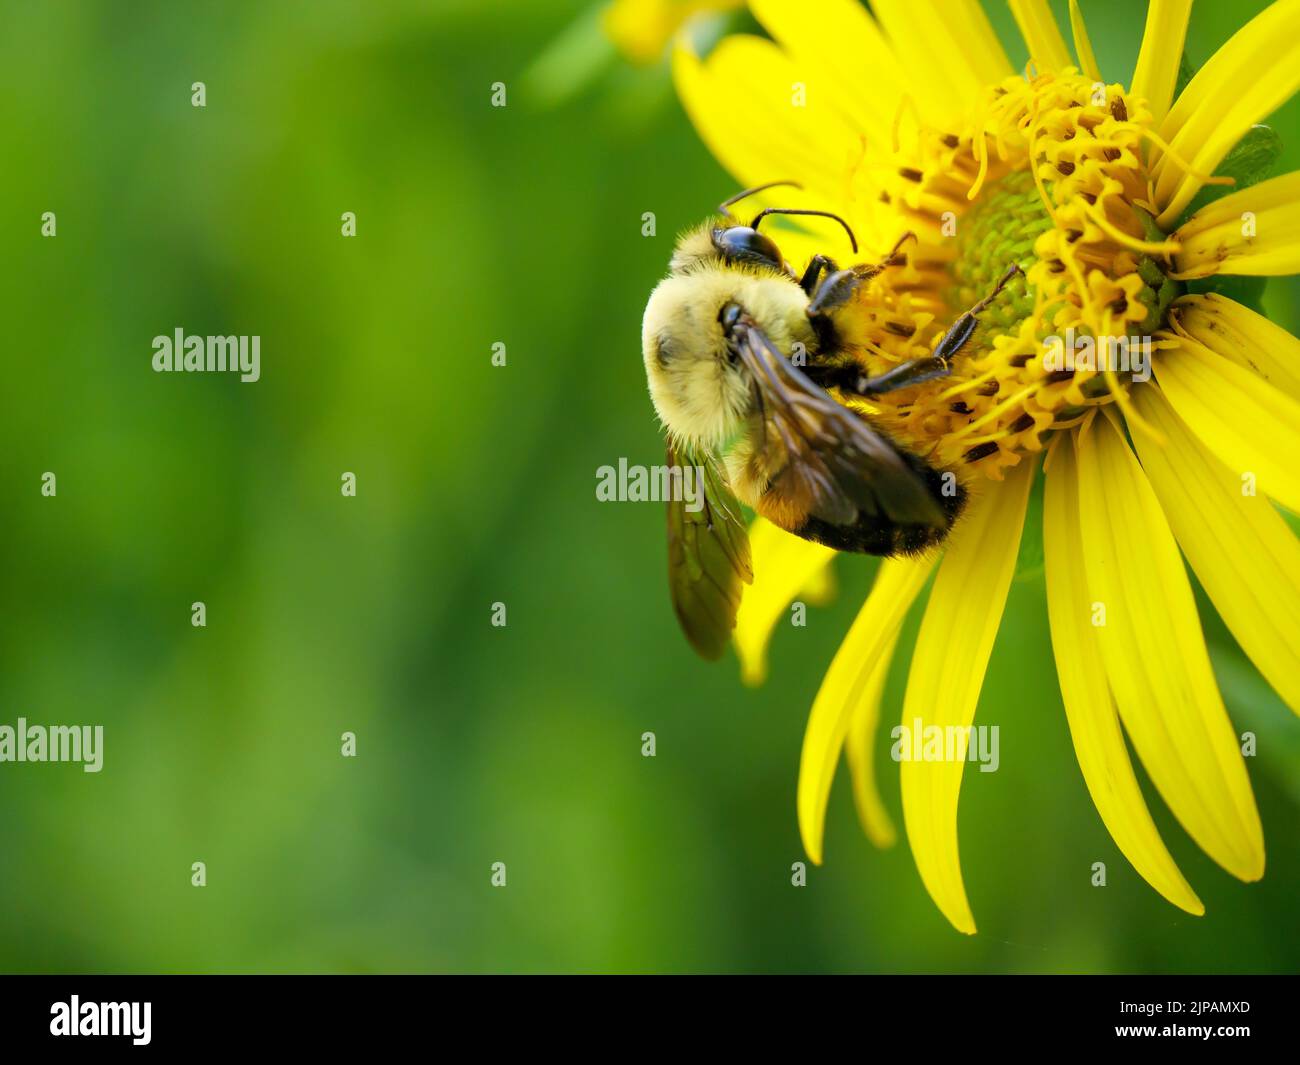 Brown-belted bumble bee (Bombus griseocollis) on cup plant flower. Stock Photo